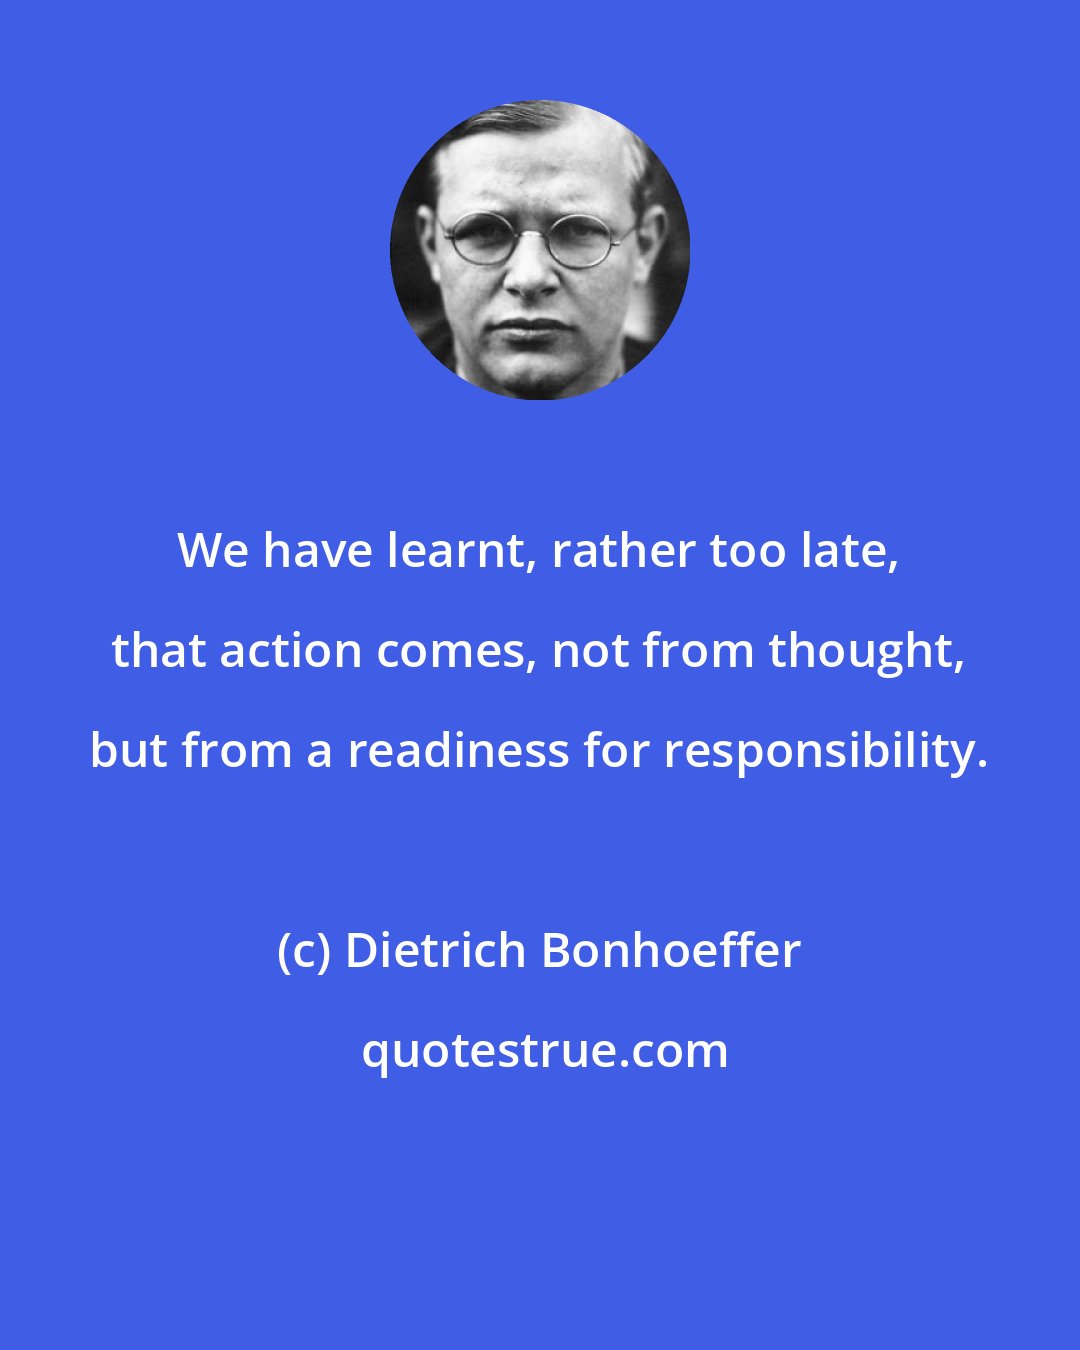 Dietrich Bonhoeffer: We have learnt, rather too late, that action comes, not from thought, but from a readiness for responsibility.